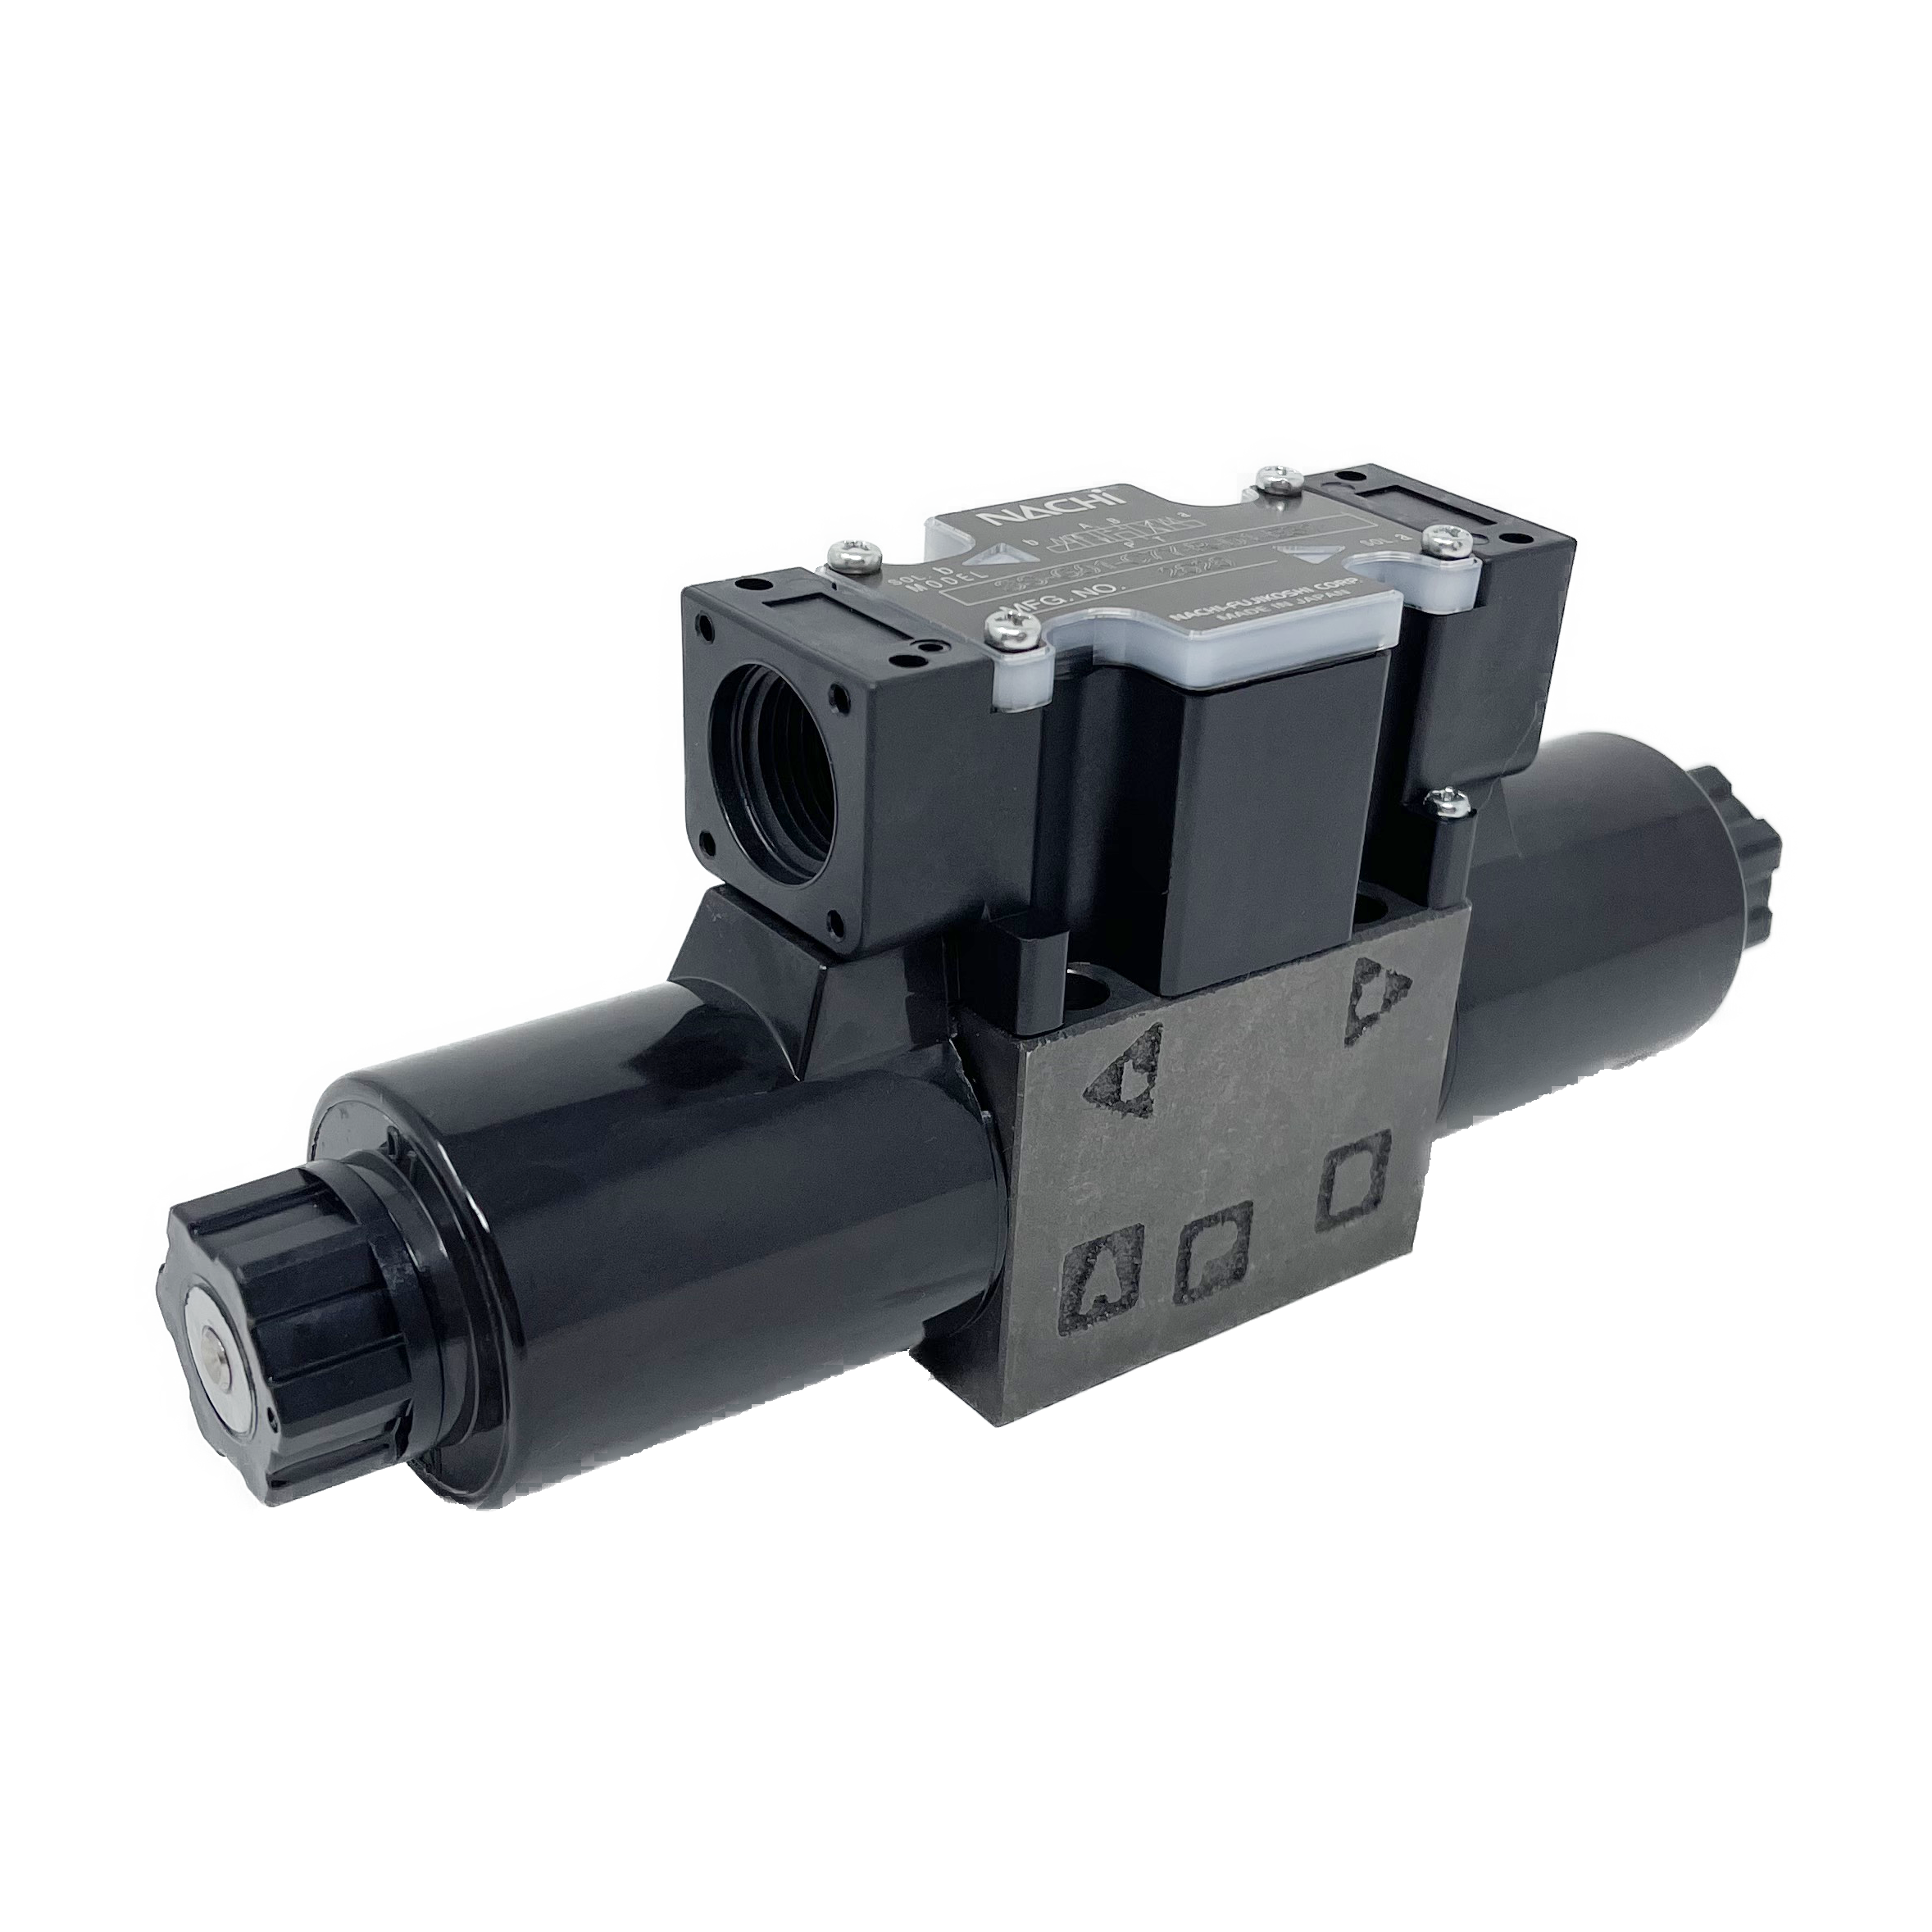 SS-G01-C7Y-R-D2-E31 : Nachi Solenoid Valve, 3P4W, D03 (NG6), 13.2GPM, 5075psi, P to T with A & B Blocked in Neutral, 24 VDC, Wiring Box with Lights